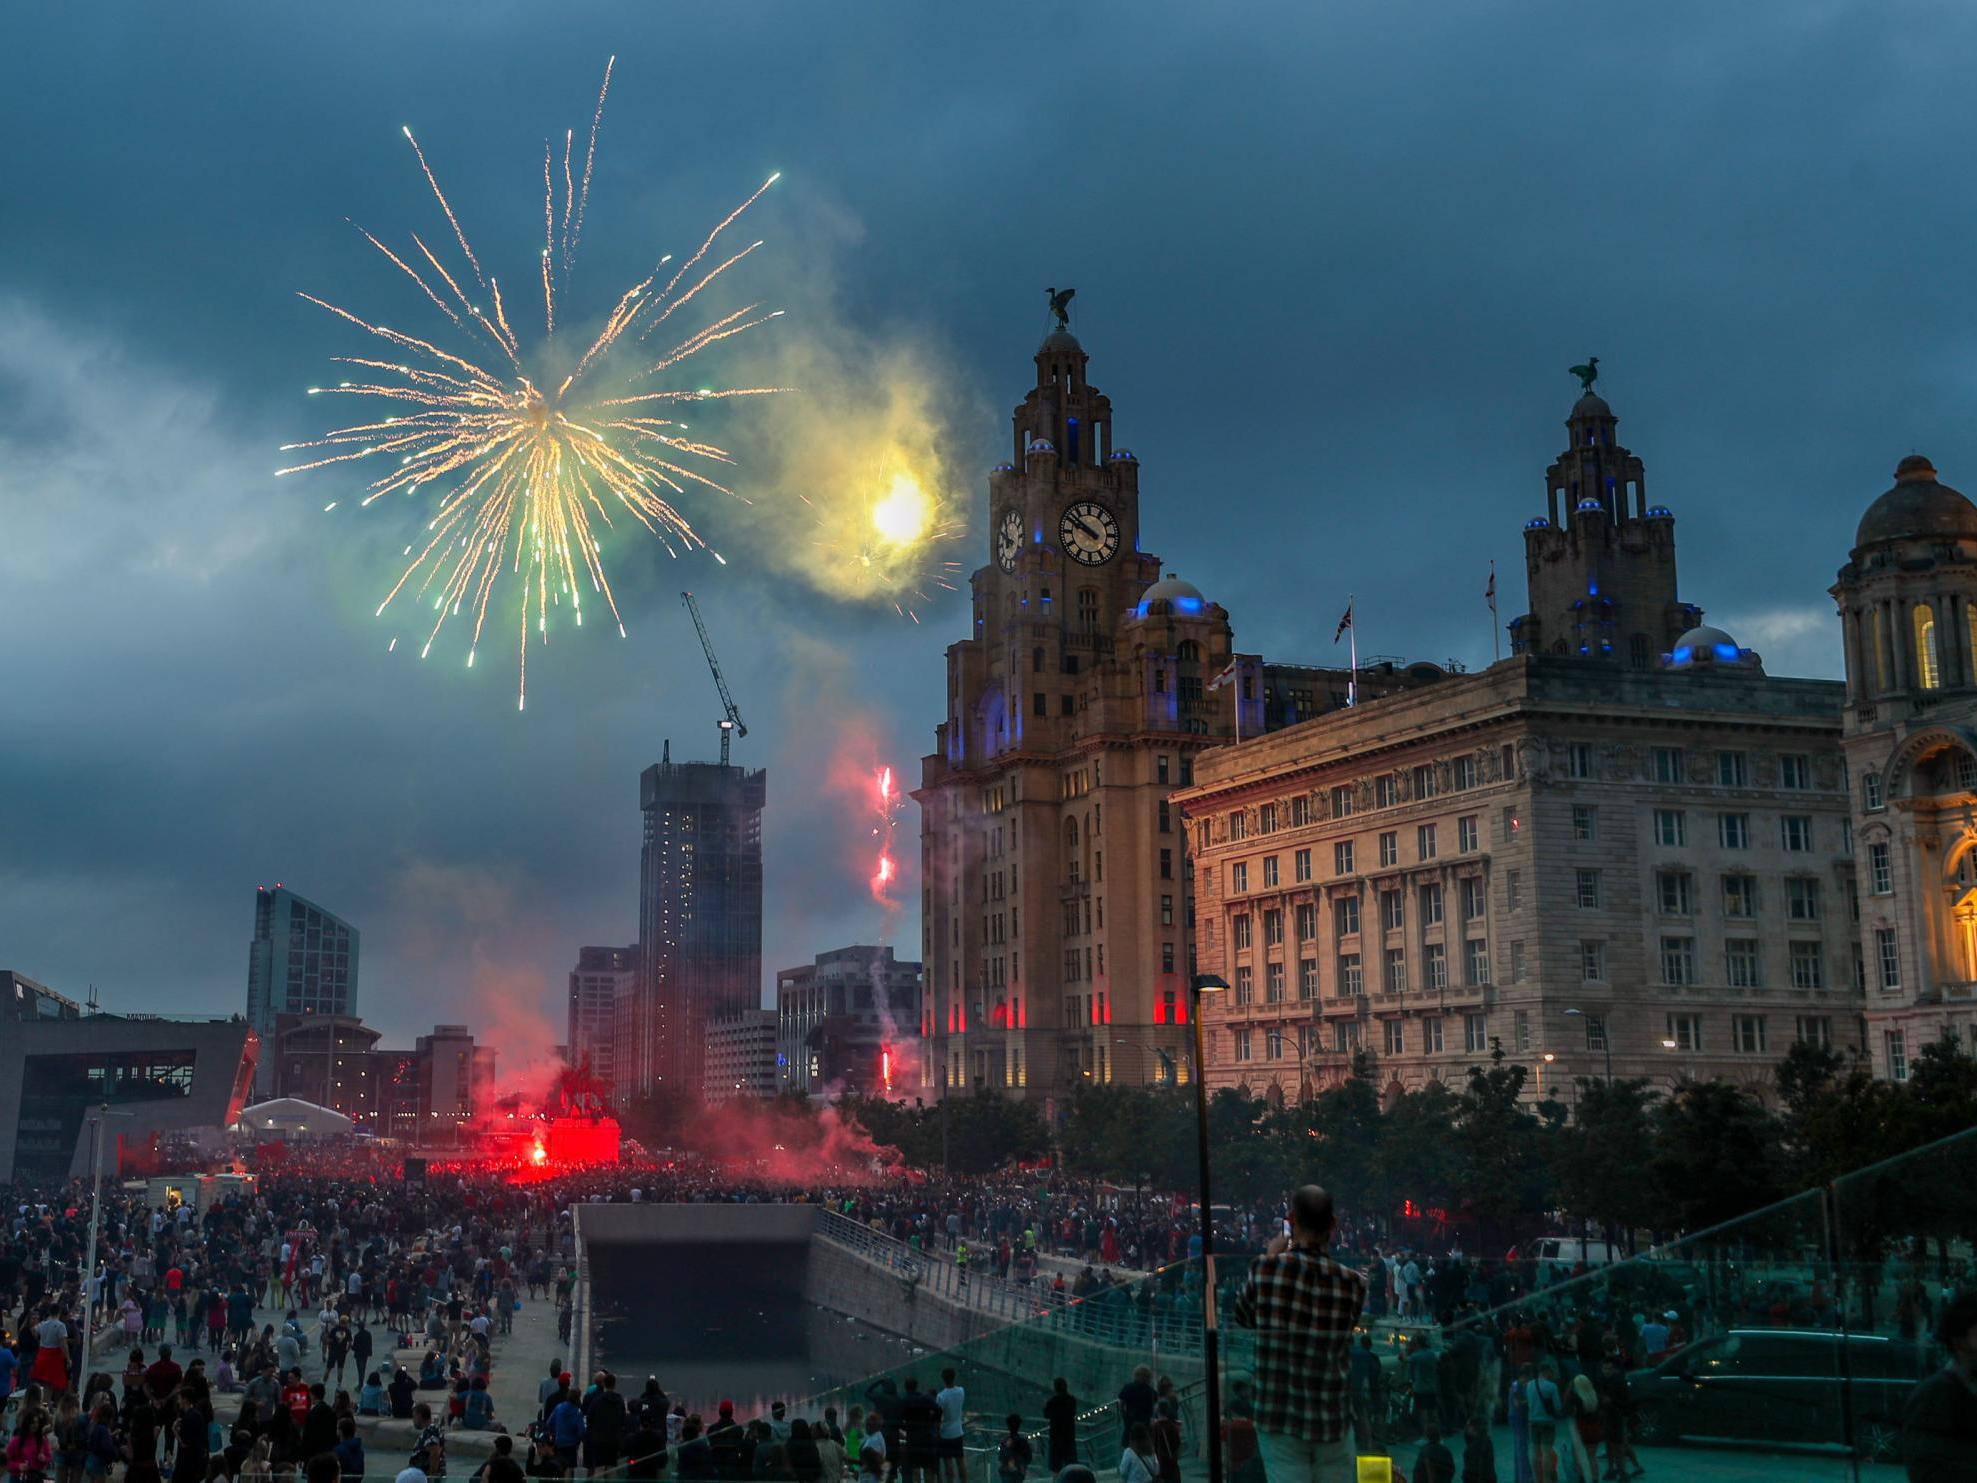 Some £10,000 of damage was caused to the Liver Building after a firework landed on a balcony